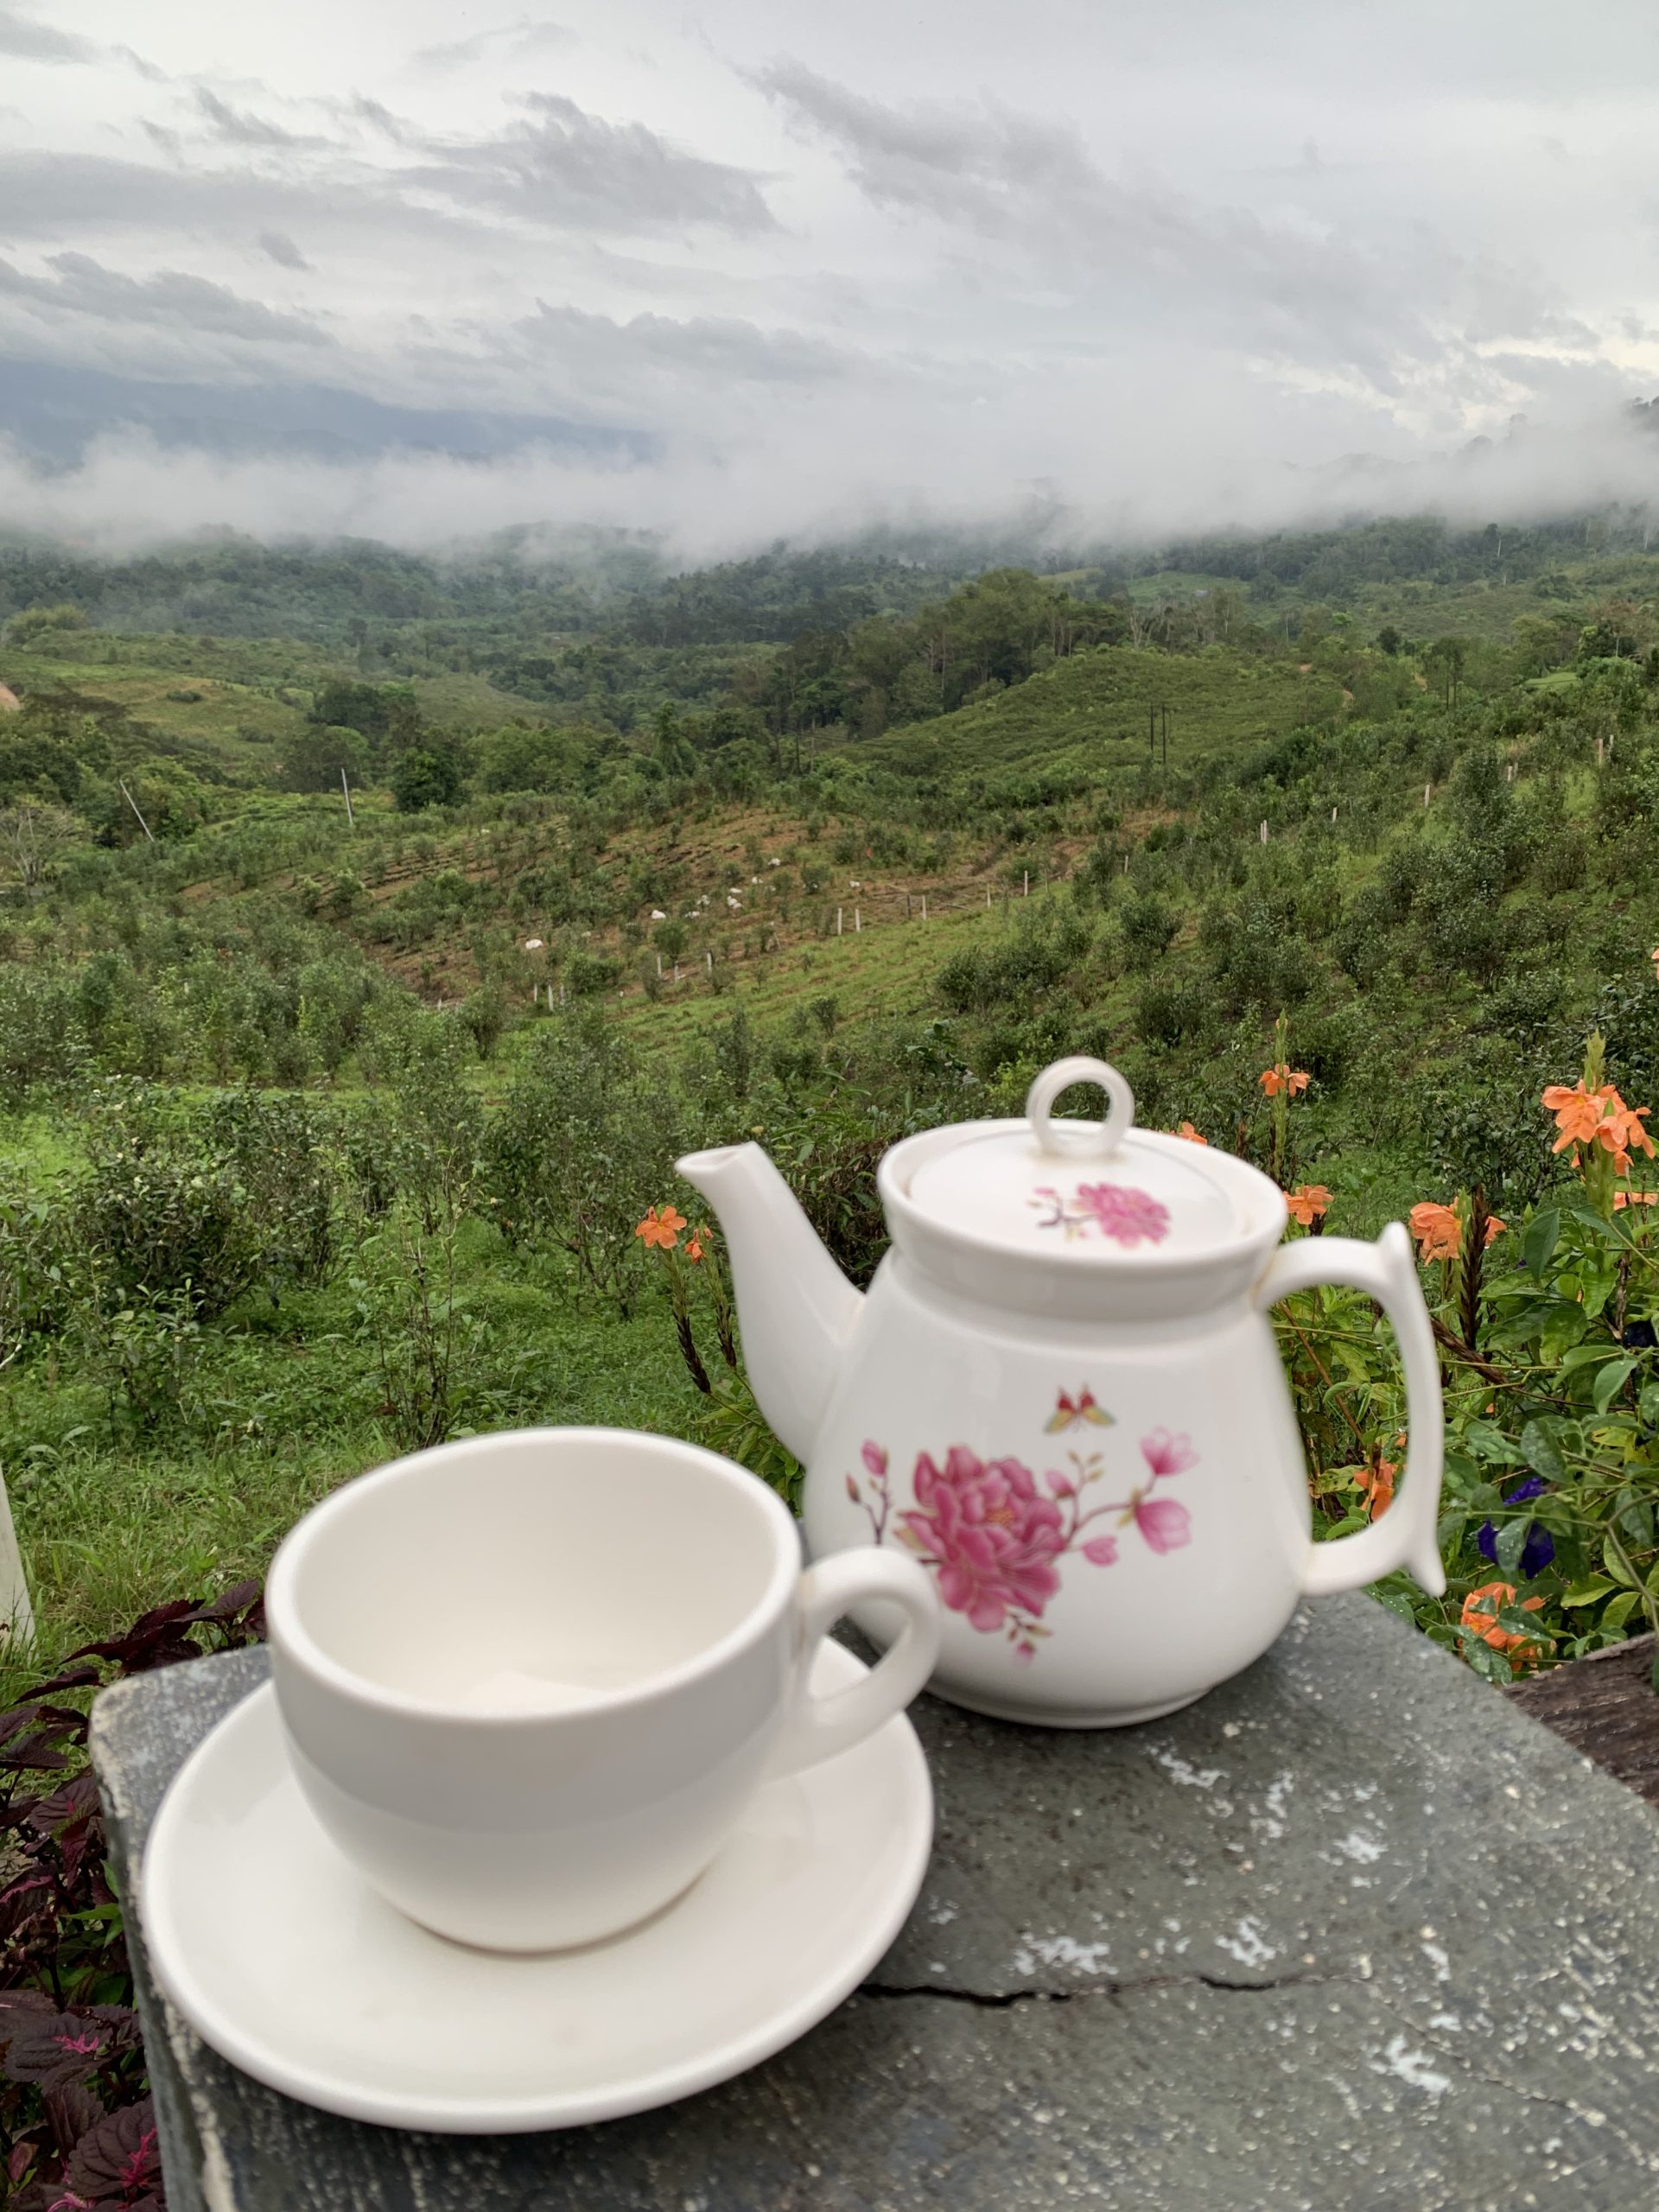 Overlooking the Organic Tea fields with a pot of tea and tea cup in view